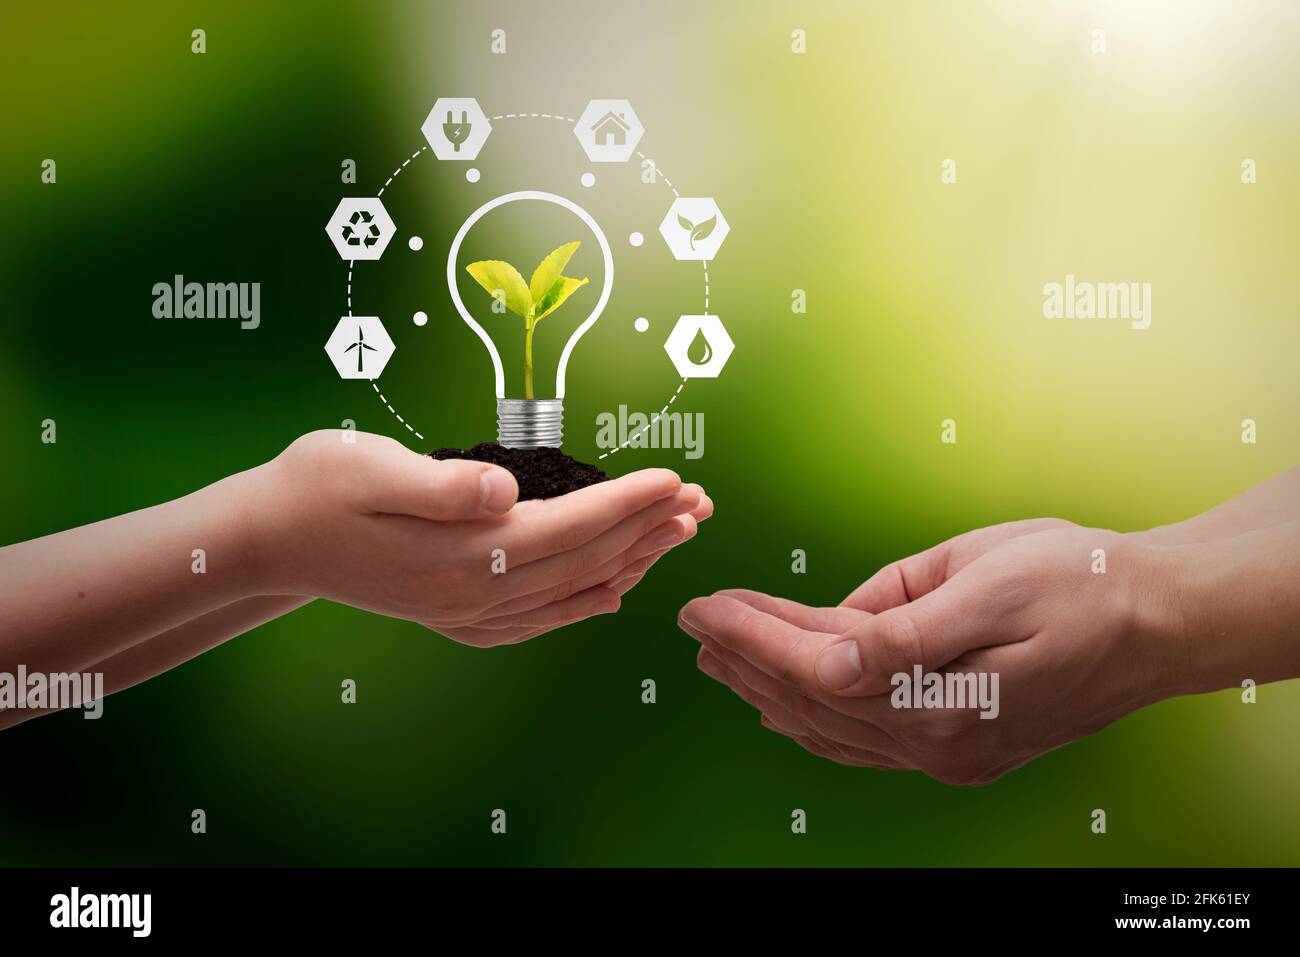 Sustainable energy sources concept with light bulb and plant Stock Photo